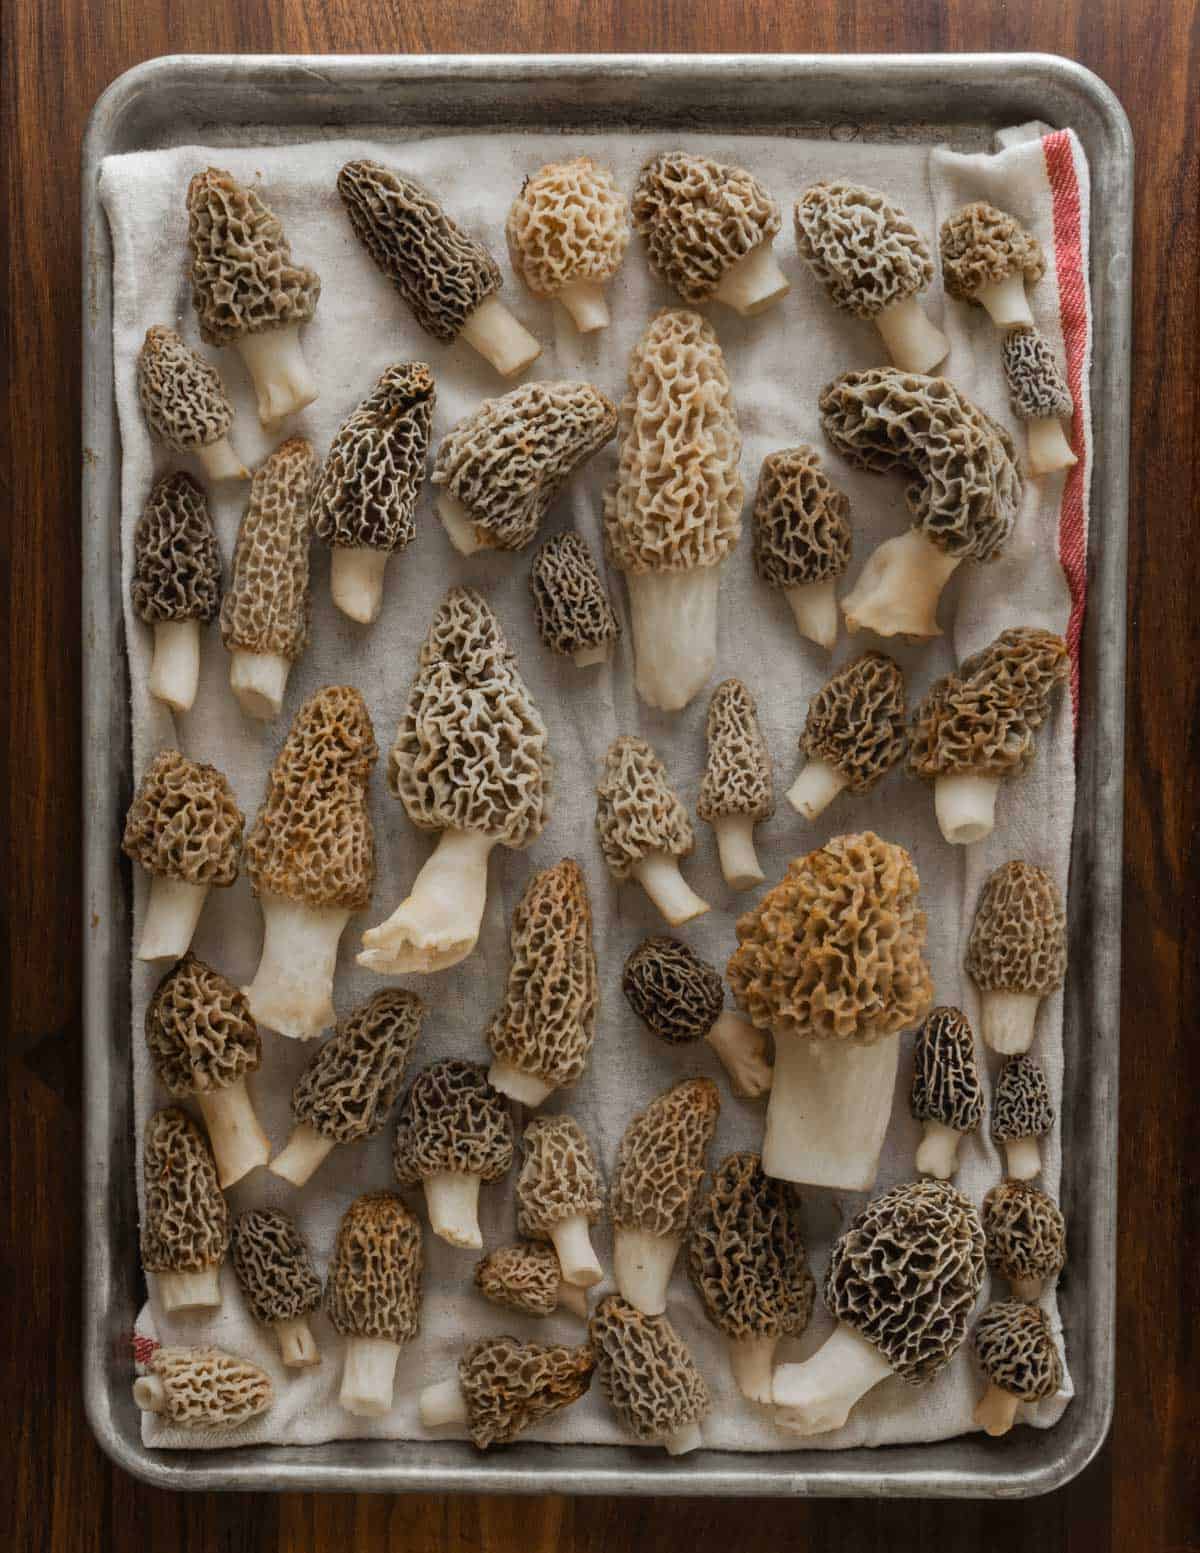 A large variety of common morel mushrooms (Morchella americana showing the differences in grey and yellow color as the mushrooms mature.